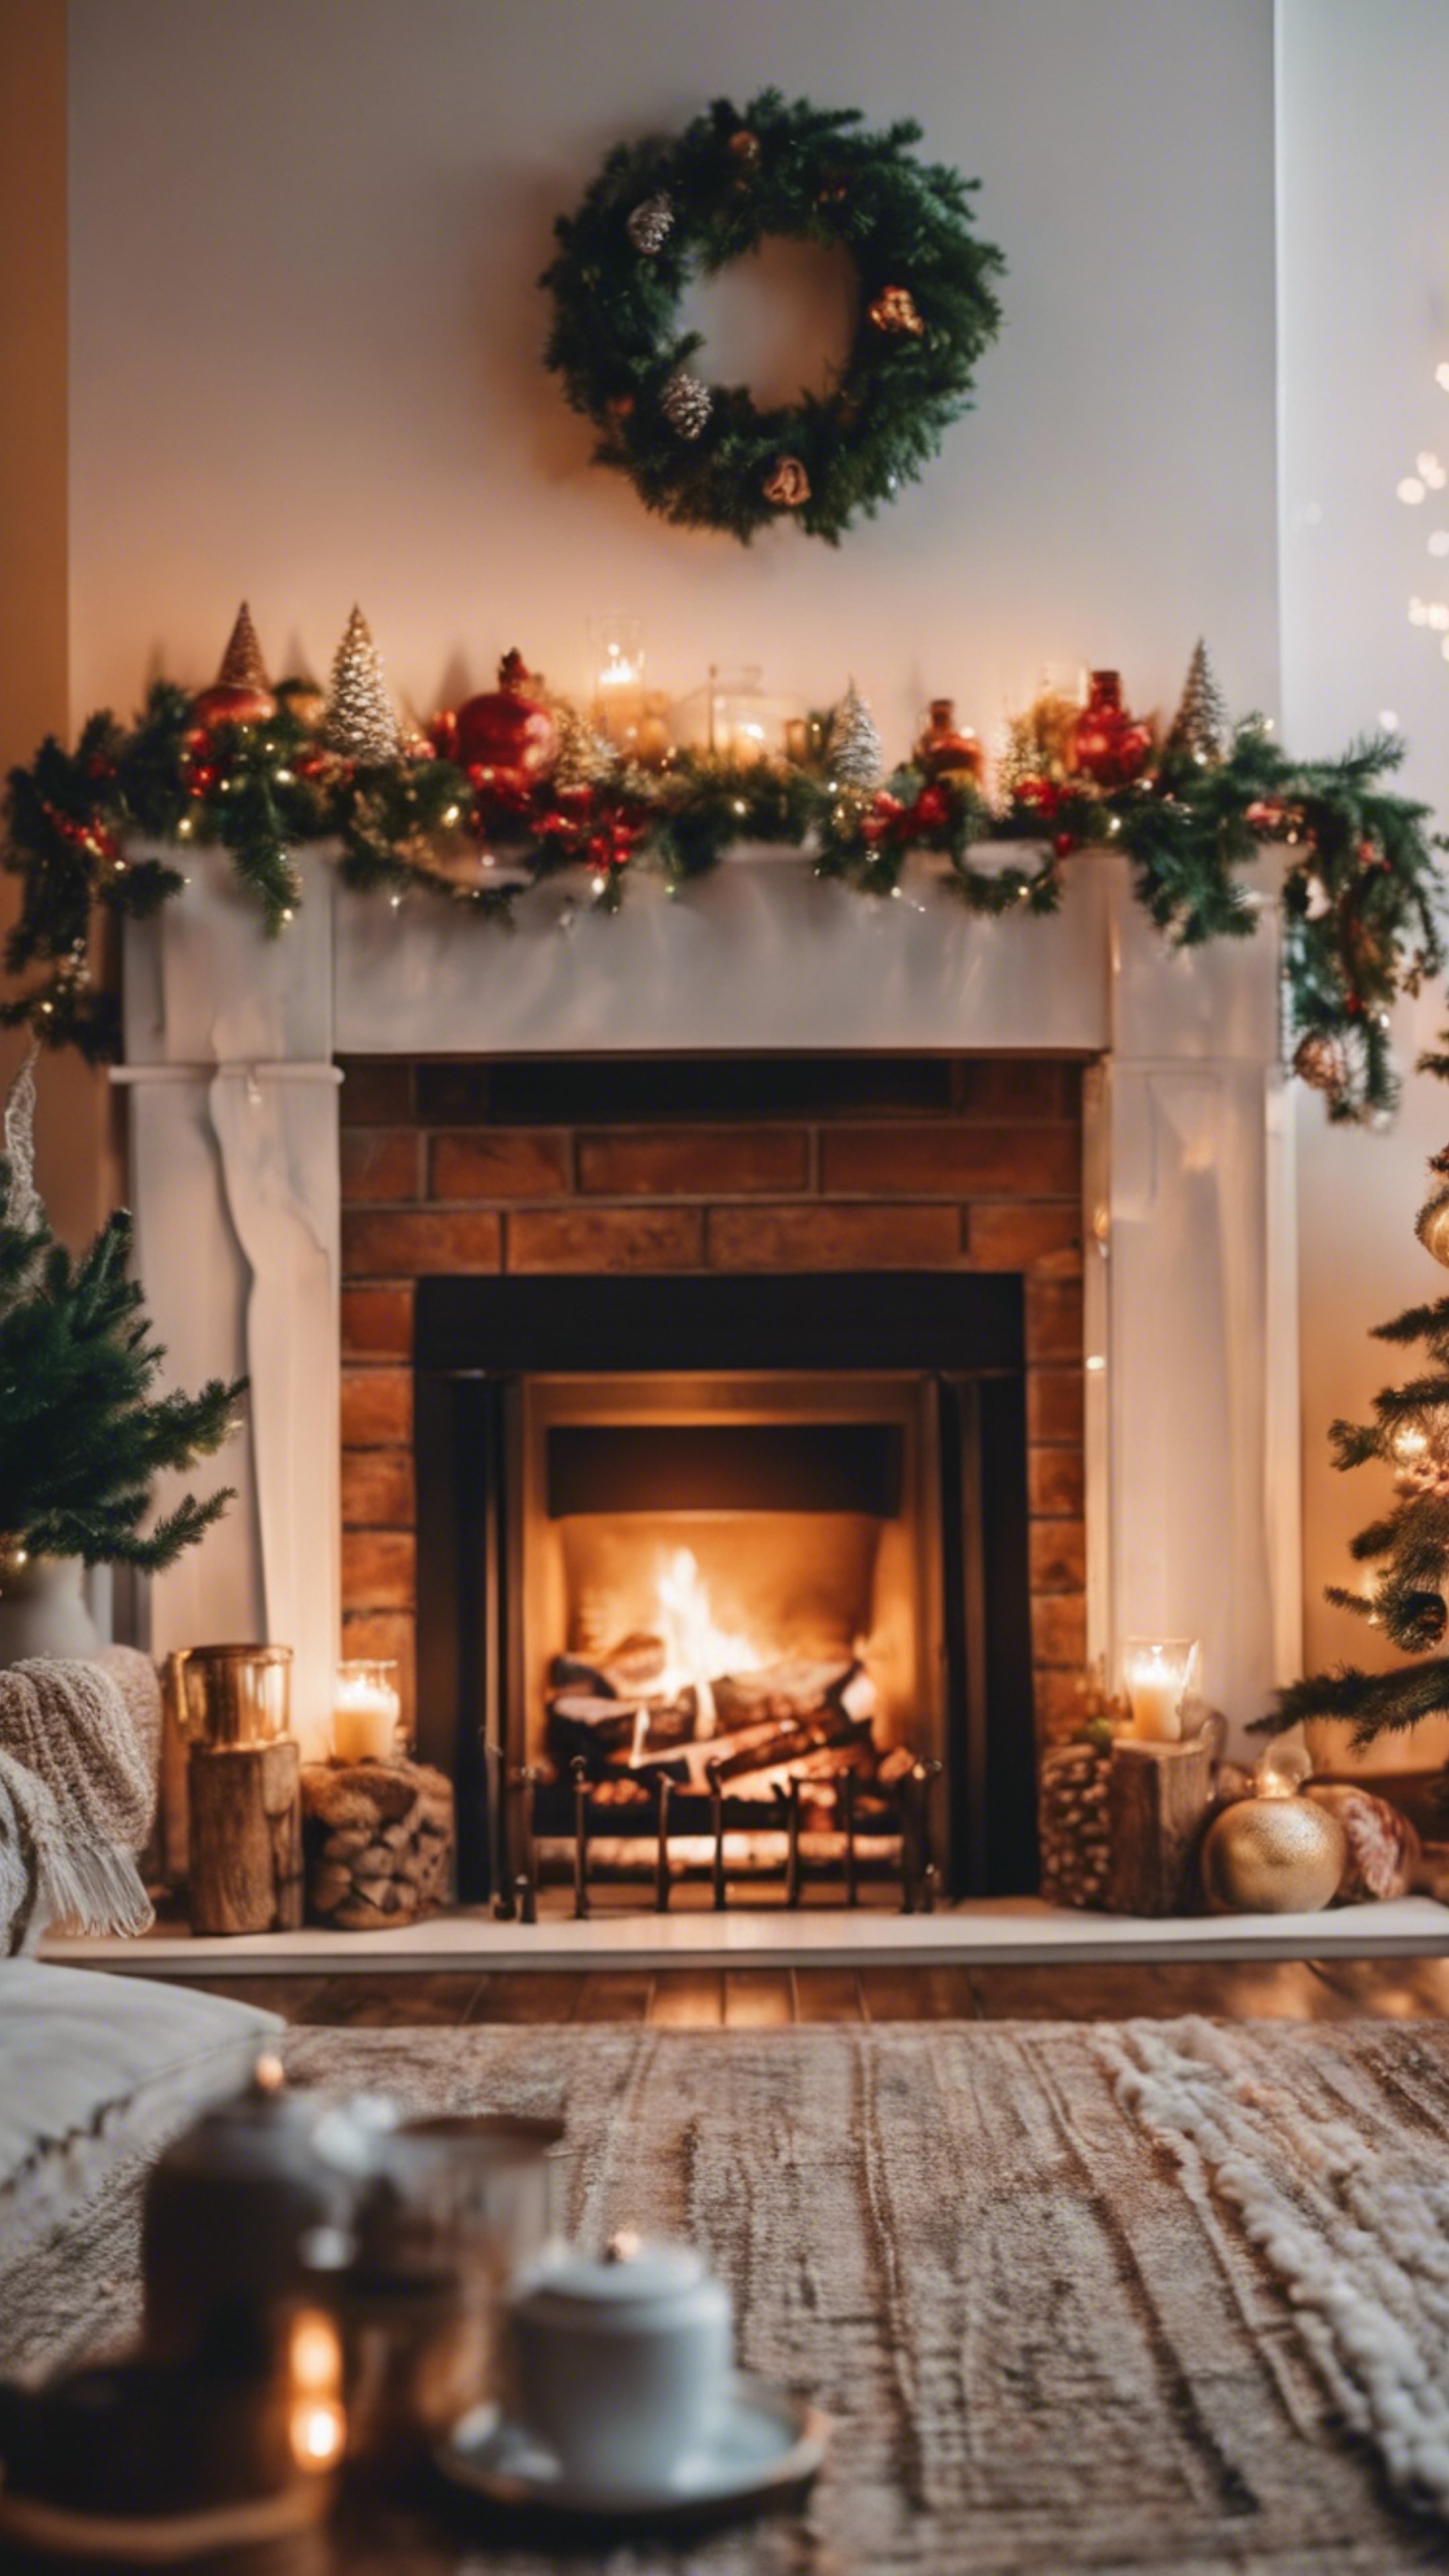 A cozy living room decorated for Christmas in boho style with a fireplace. Wallpaper[2870ecc061ac4c6491a9]